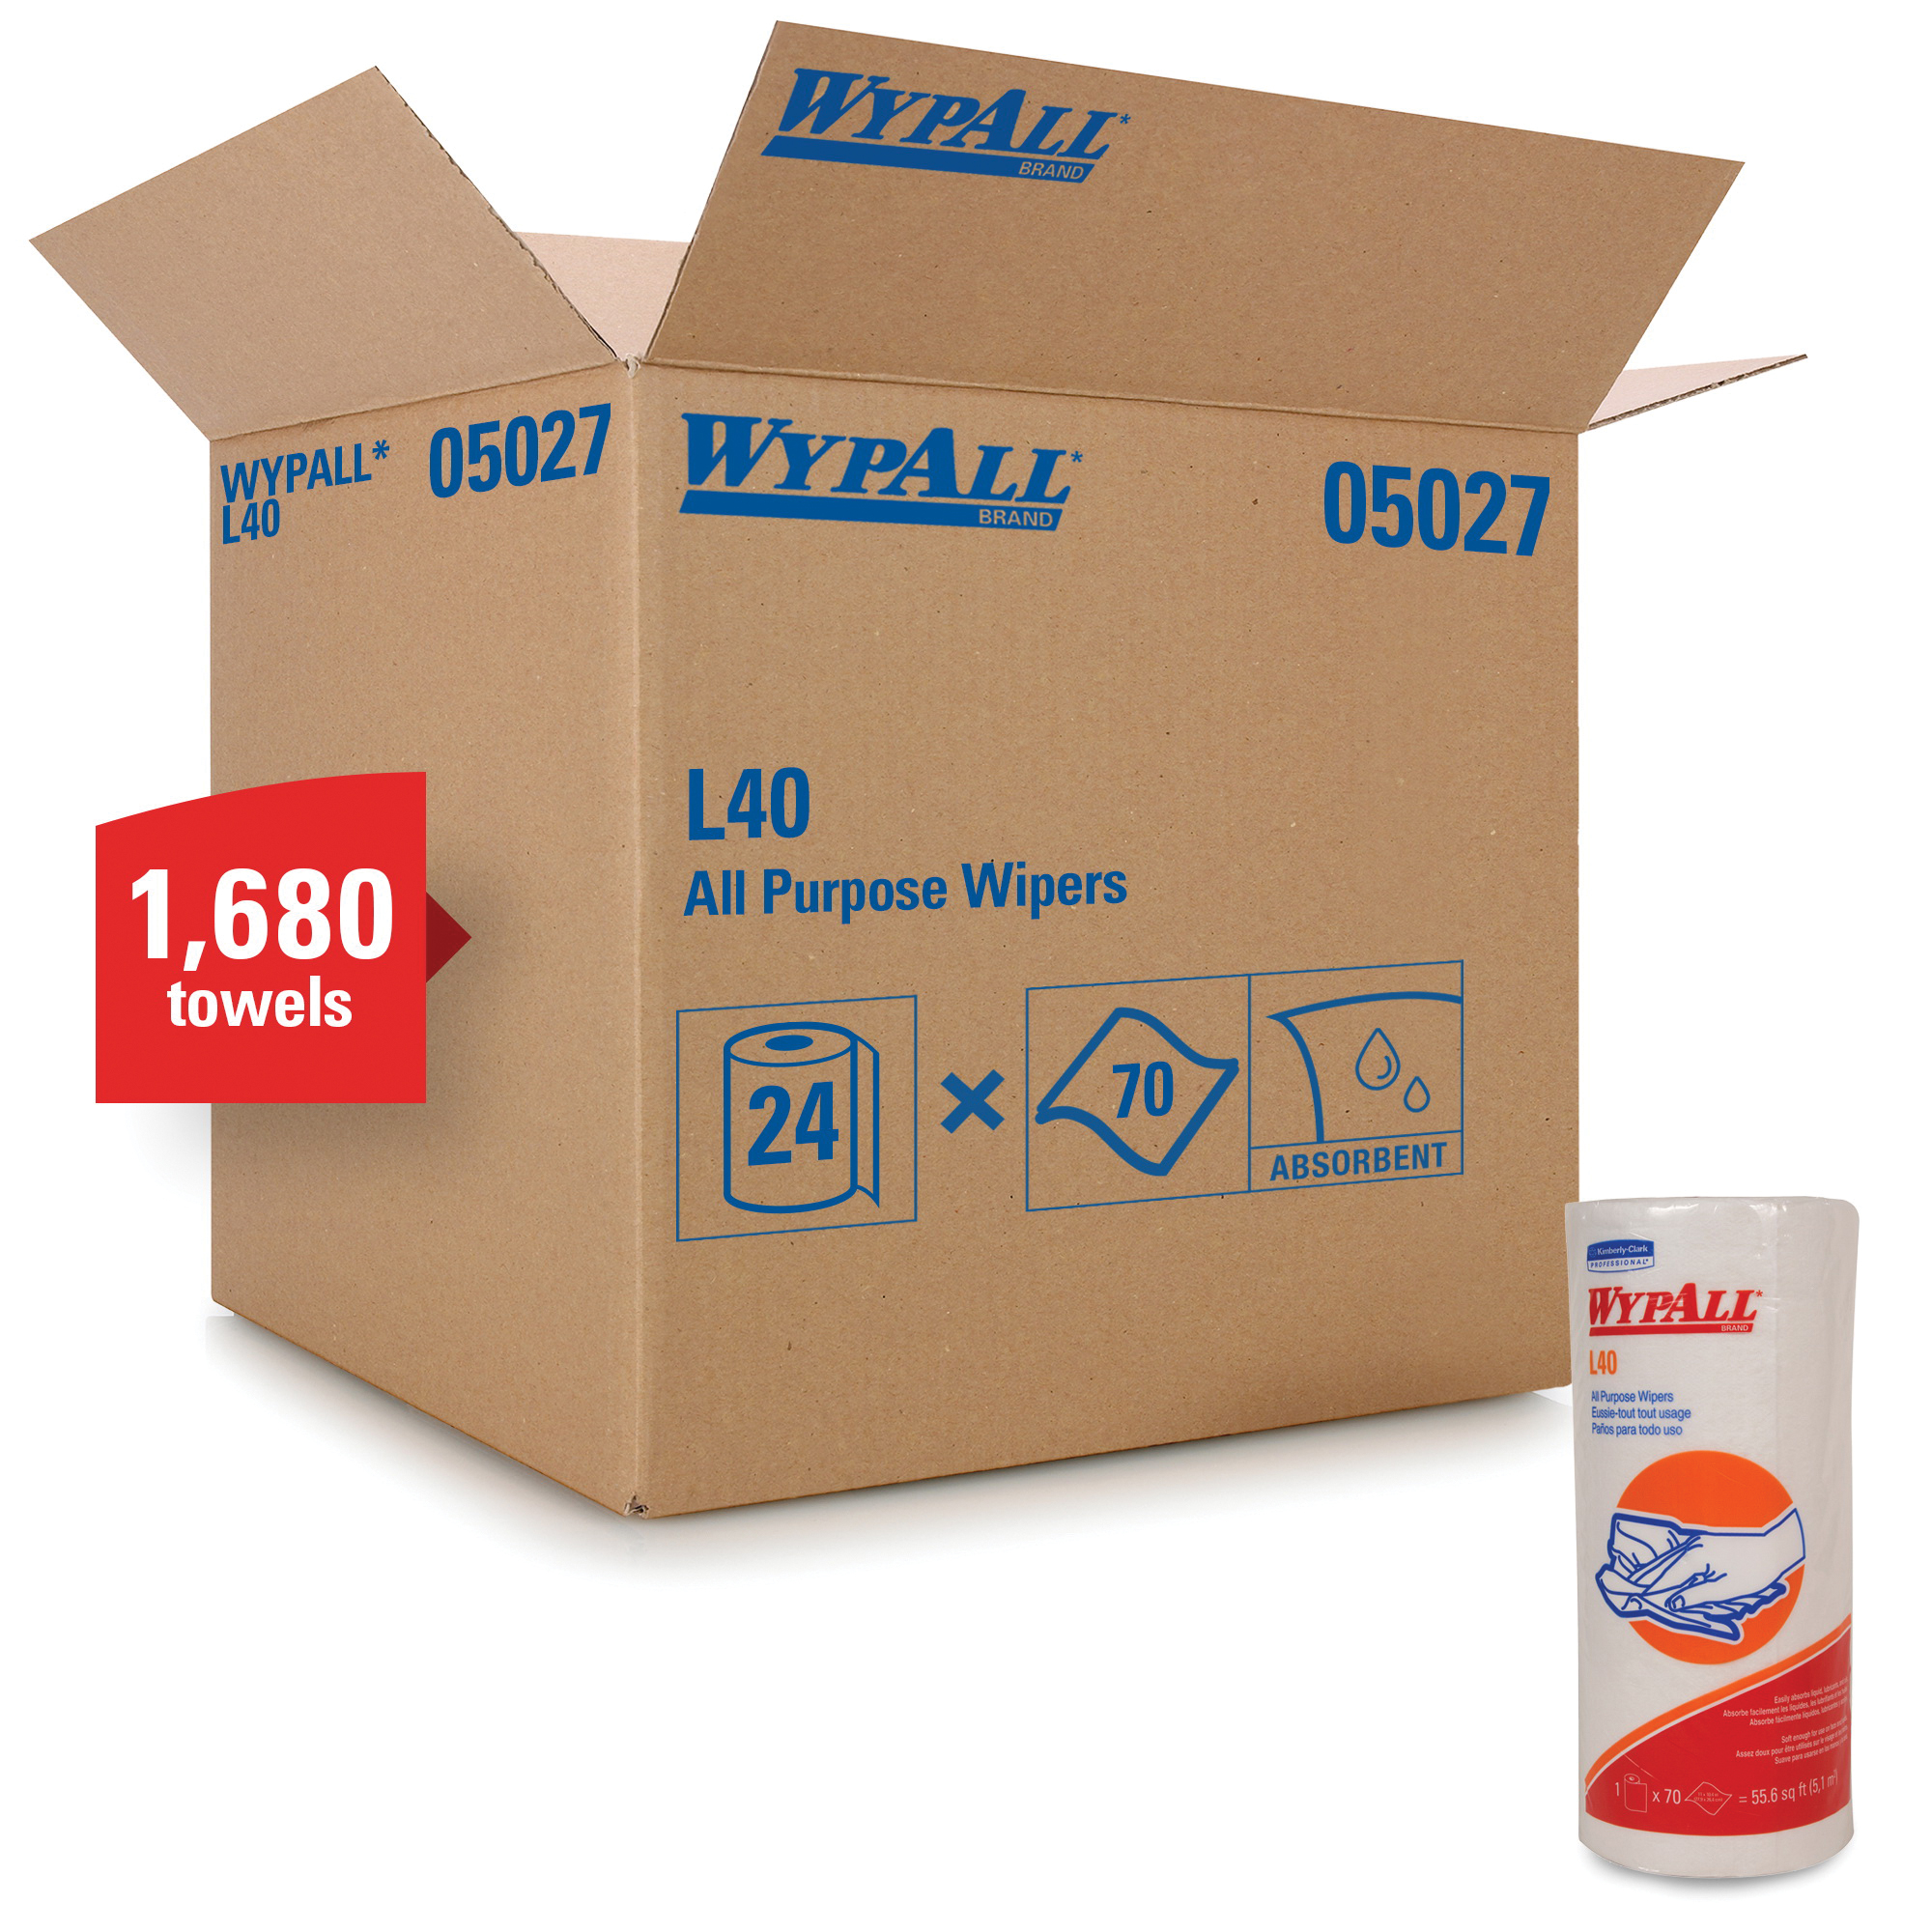 WypAll* 05007 L40 America's Favorite General Purpose Wiper, 13.4 x 12.5 in, 750 Sheets Capacity, Double Re-Creped, White